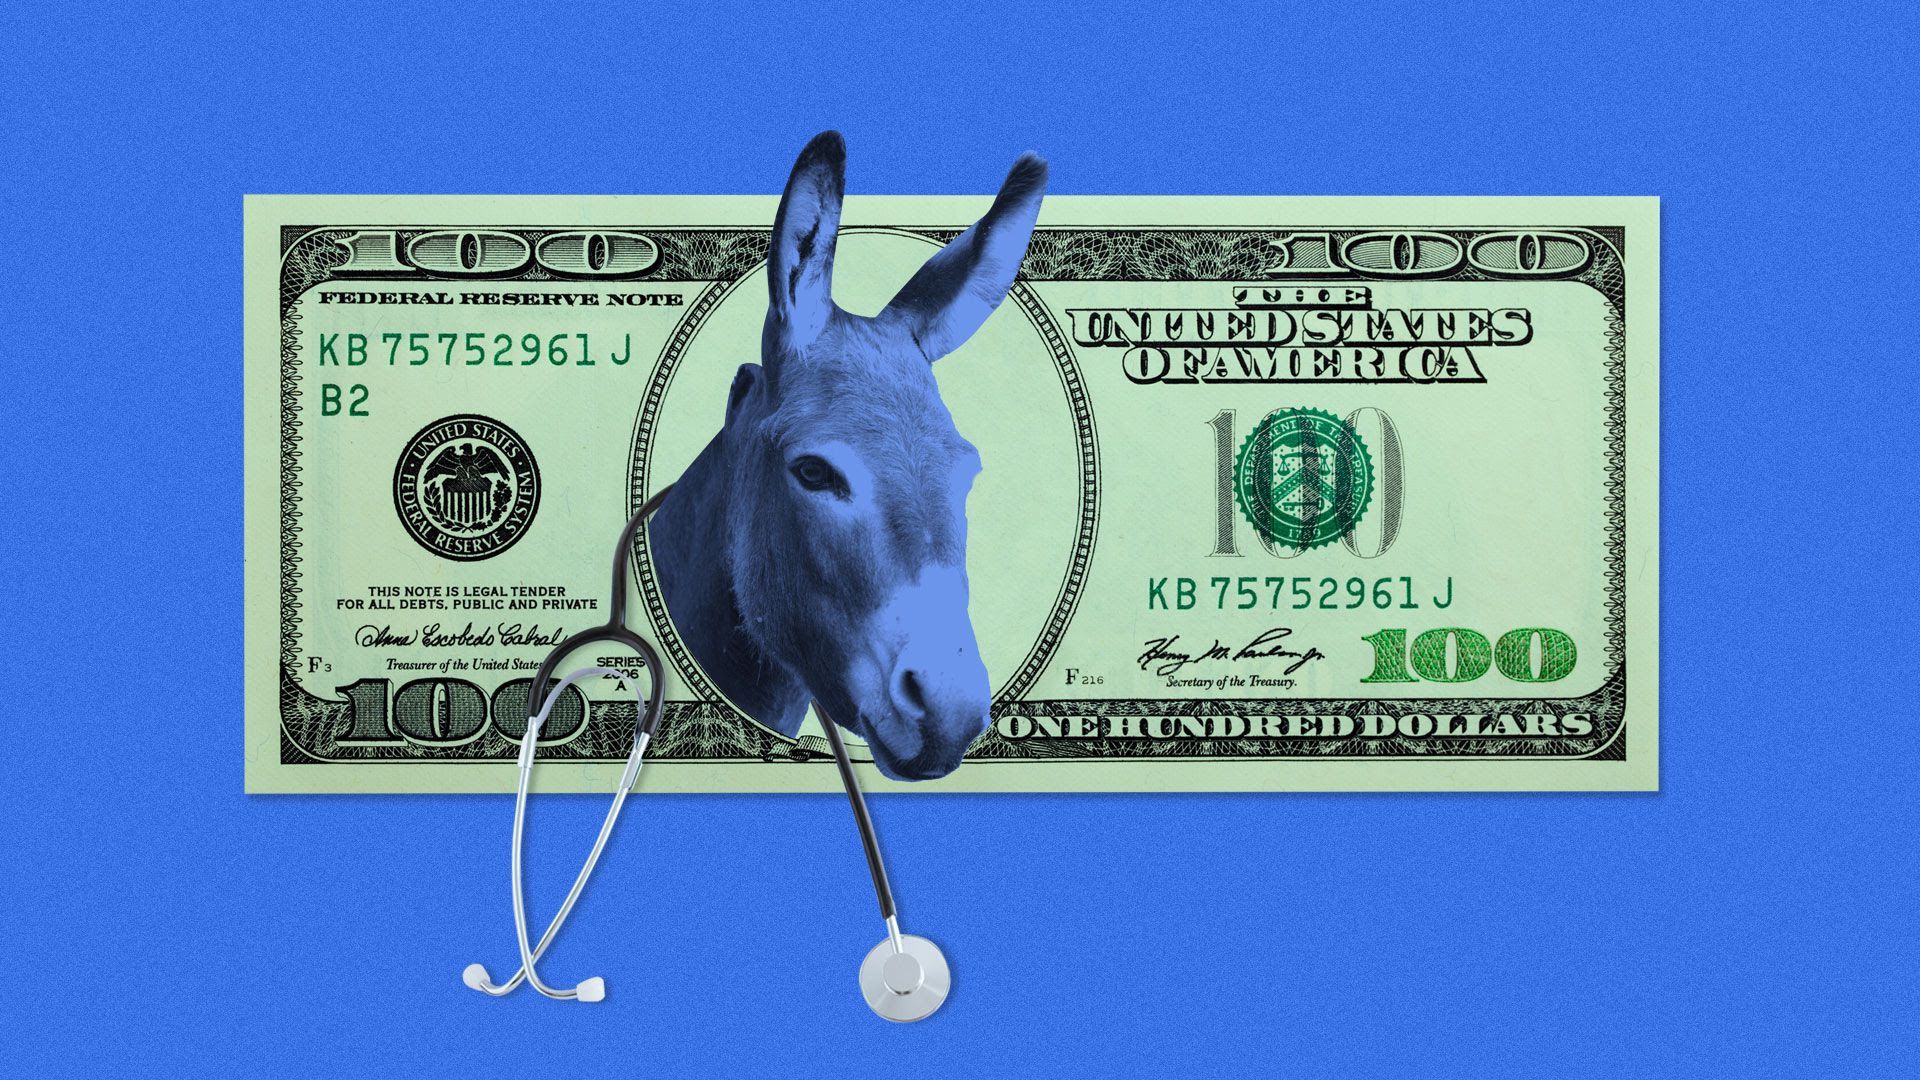 An illustration of a 100 dollar bill with a blue donkey inside it.